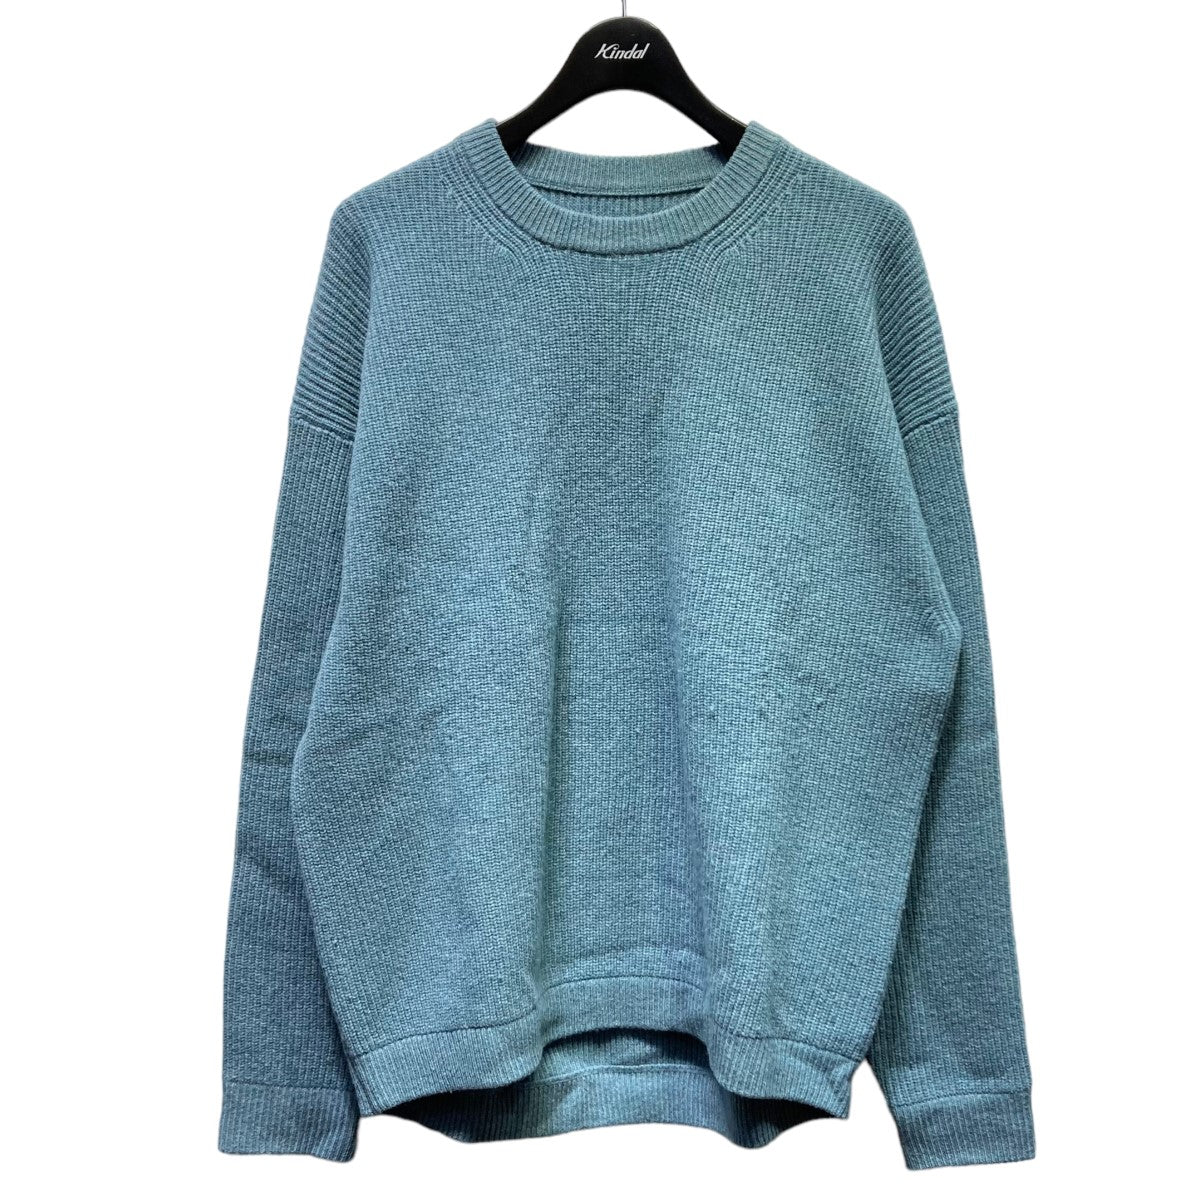 crepuscule(クレプスキュール) ONLY ARK別注AZE L／S 畦ニットセーター 